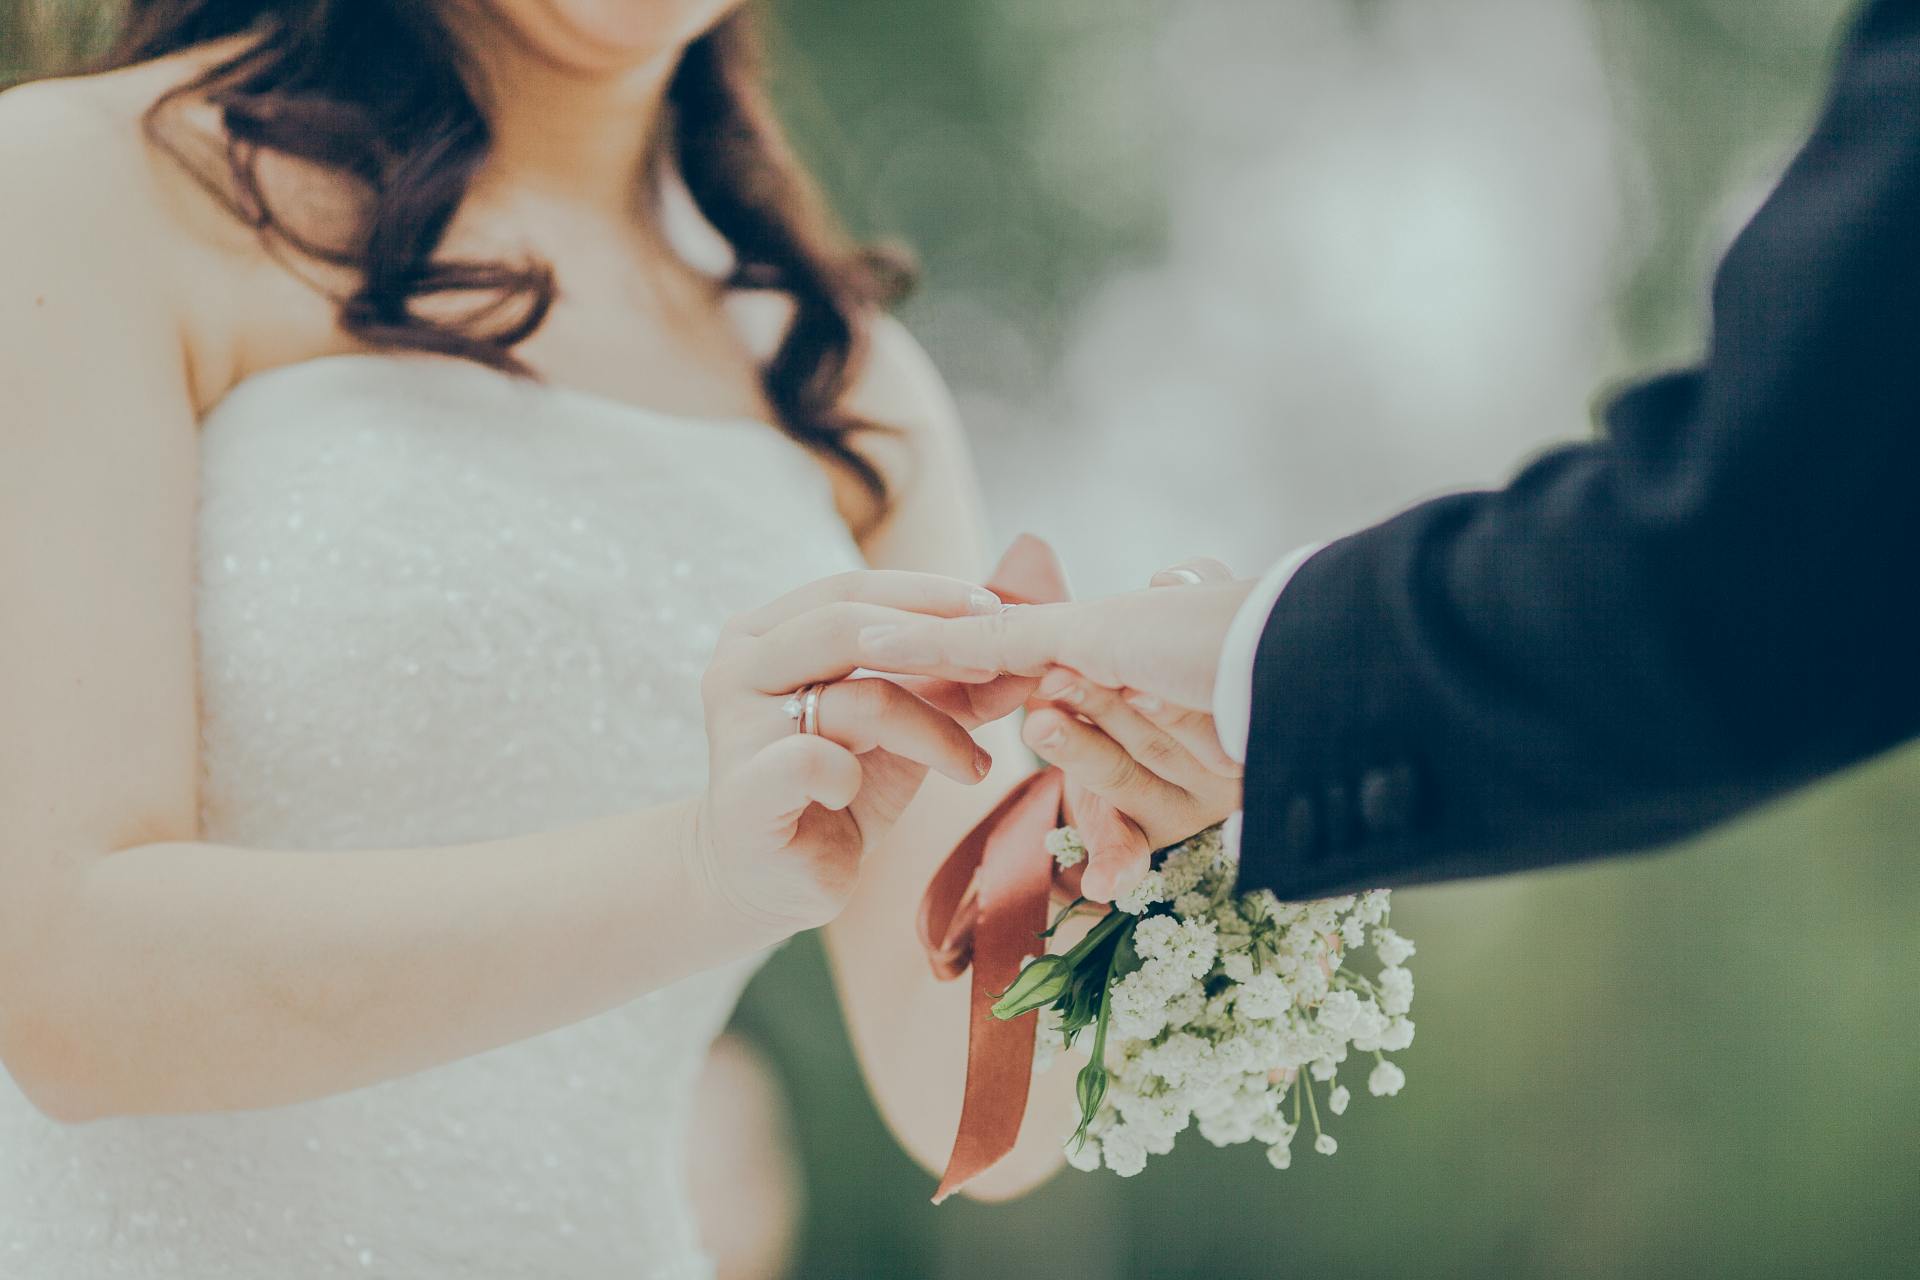 Wedding myths and how to overcome them